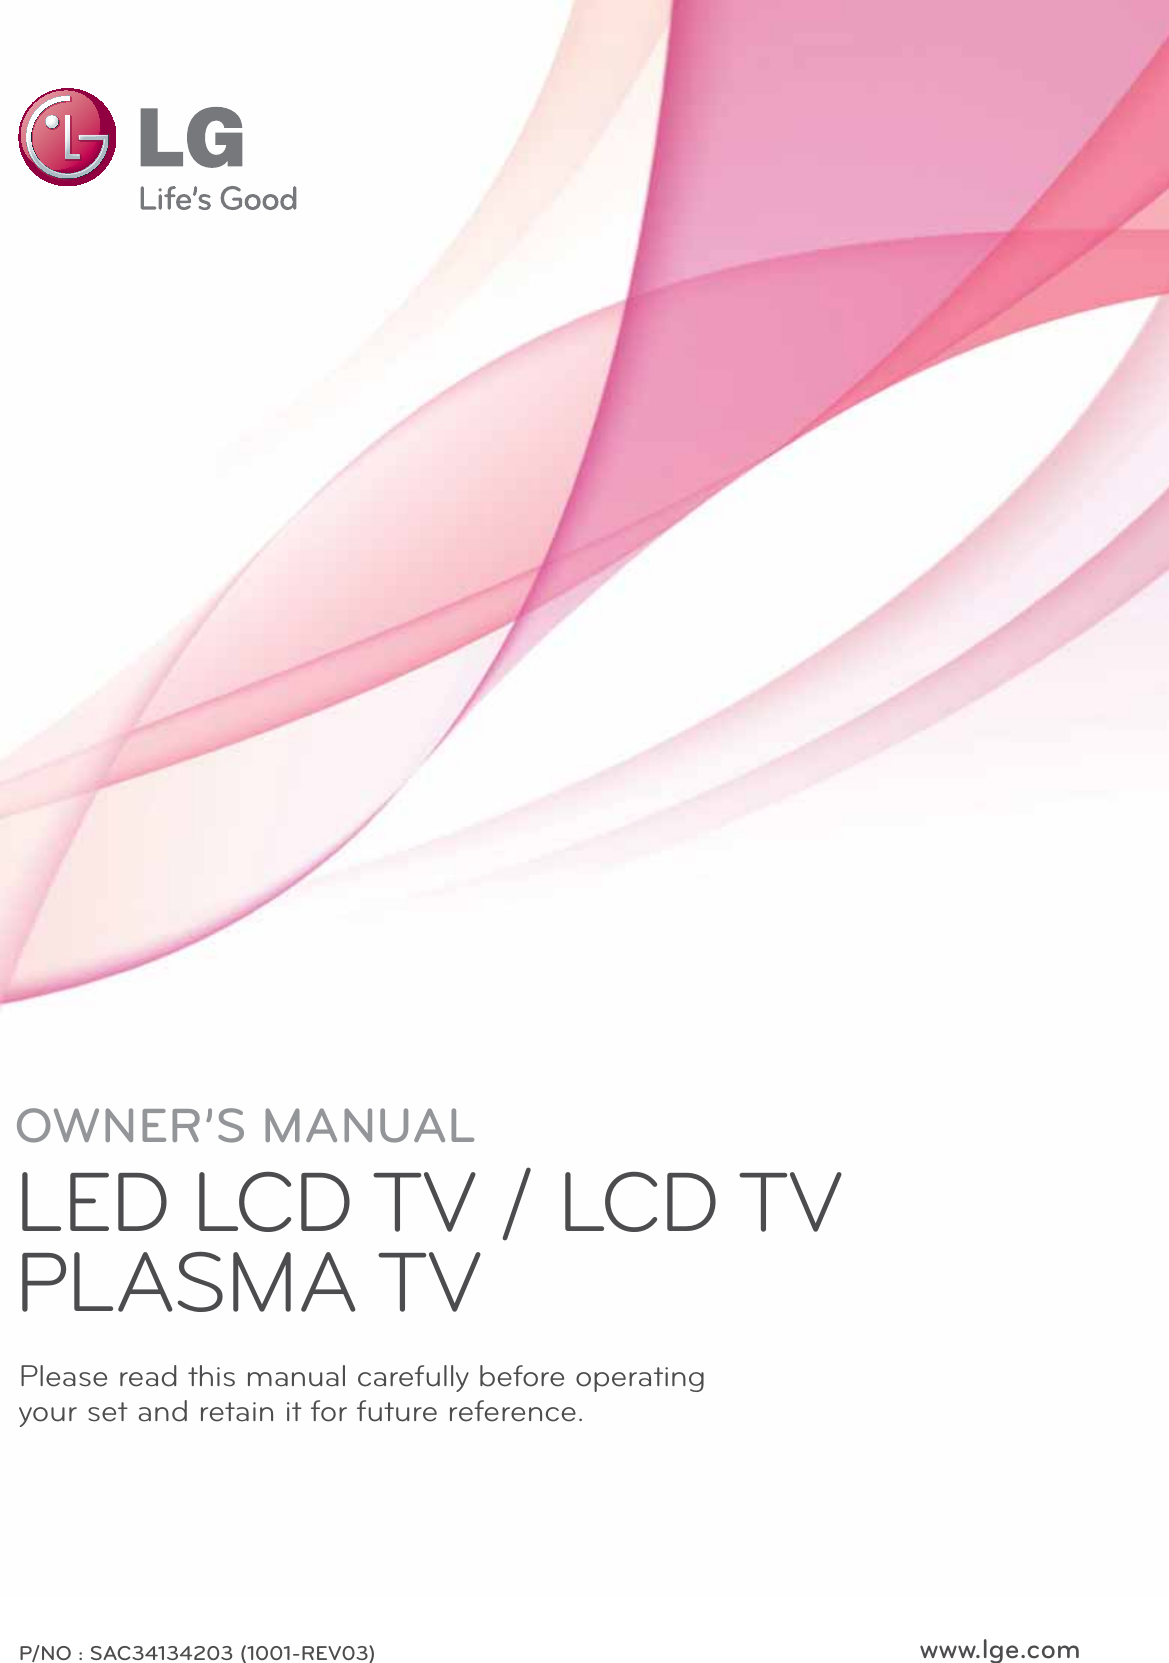 P/NO : SAC34134203 (1001-REV03) www.lge.comOWNER’S MANUALLED LCD TV / LCD TV PLASMA TV Please read this manual carefully before operatingyour set and retain it for future reference.